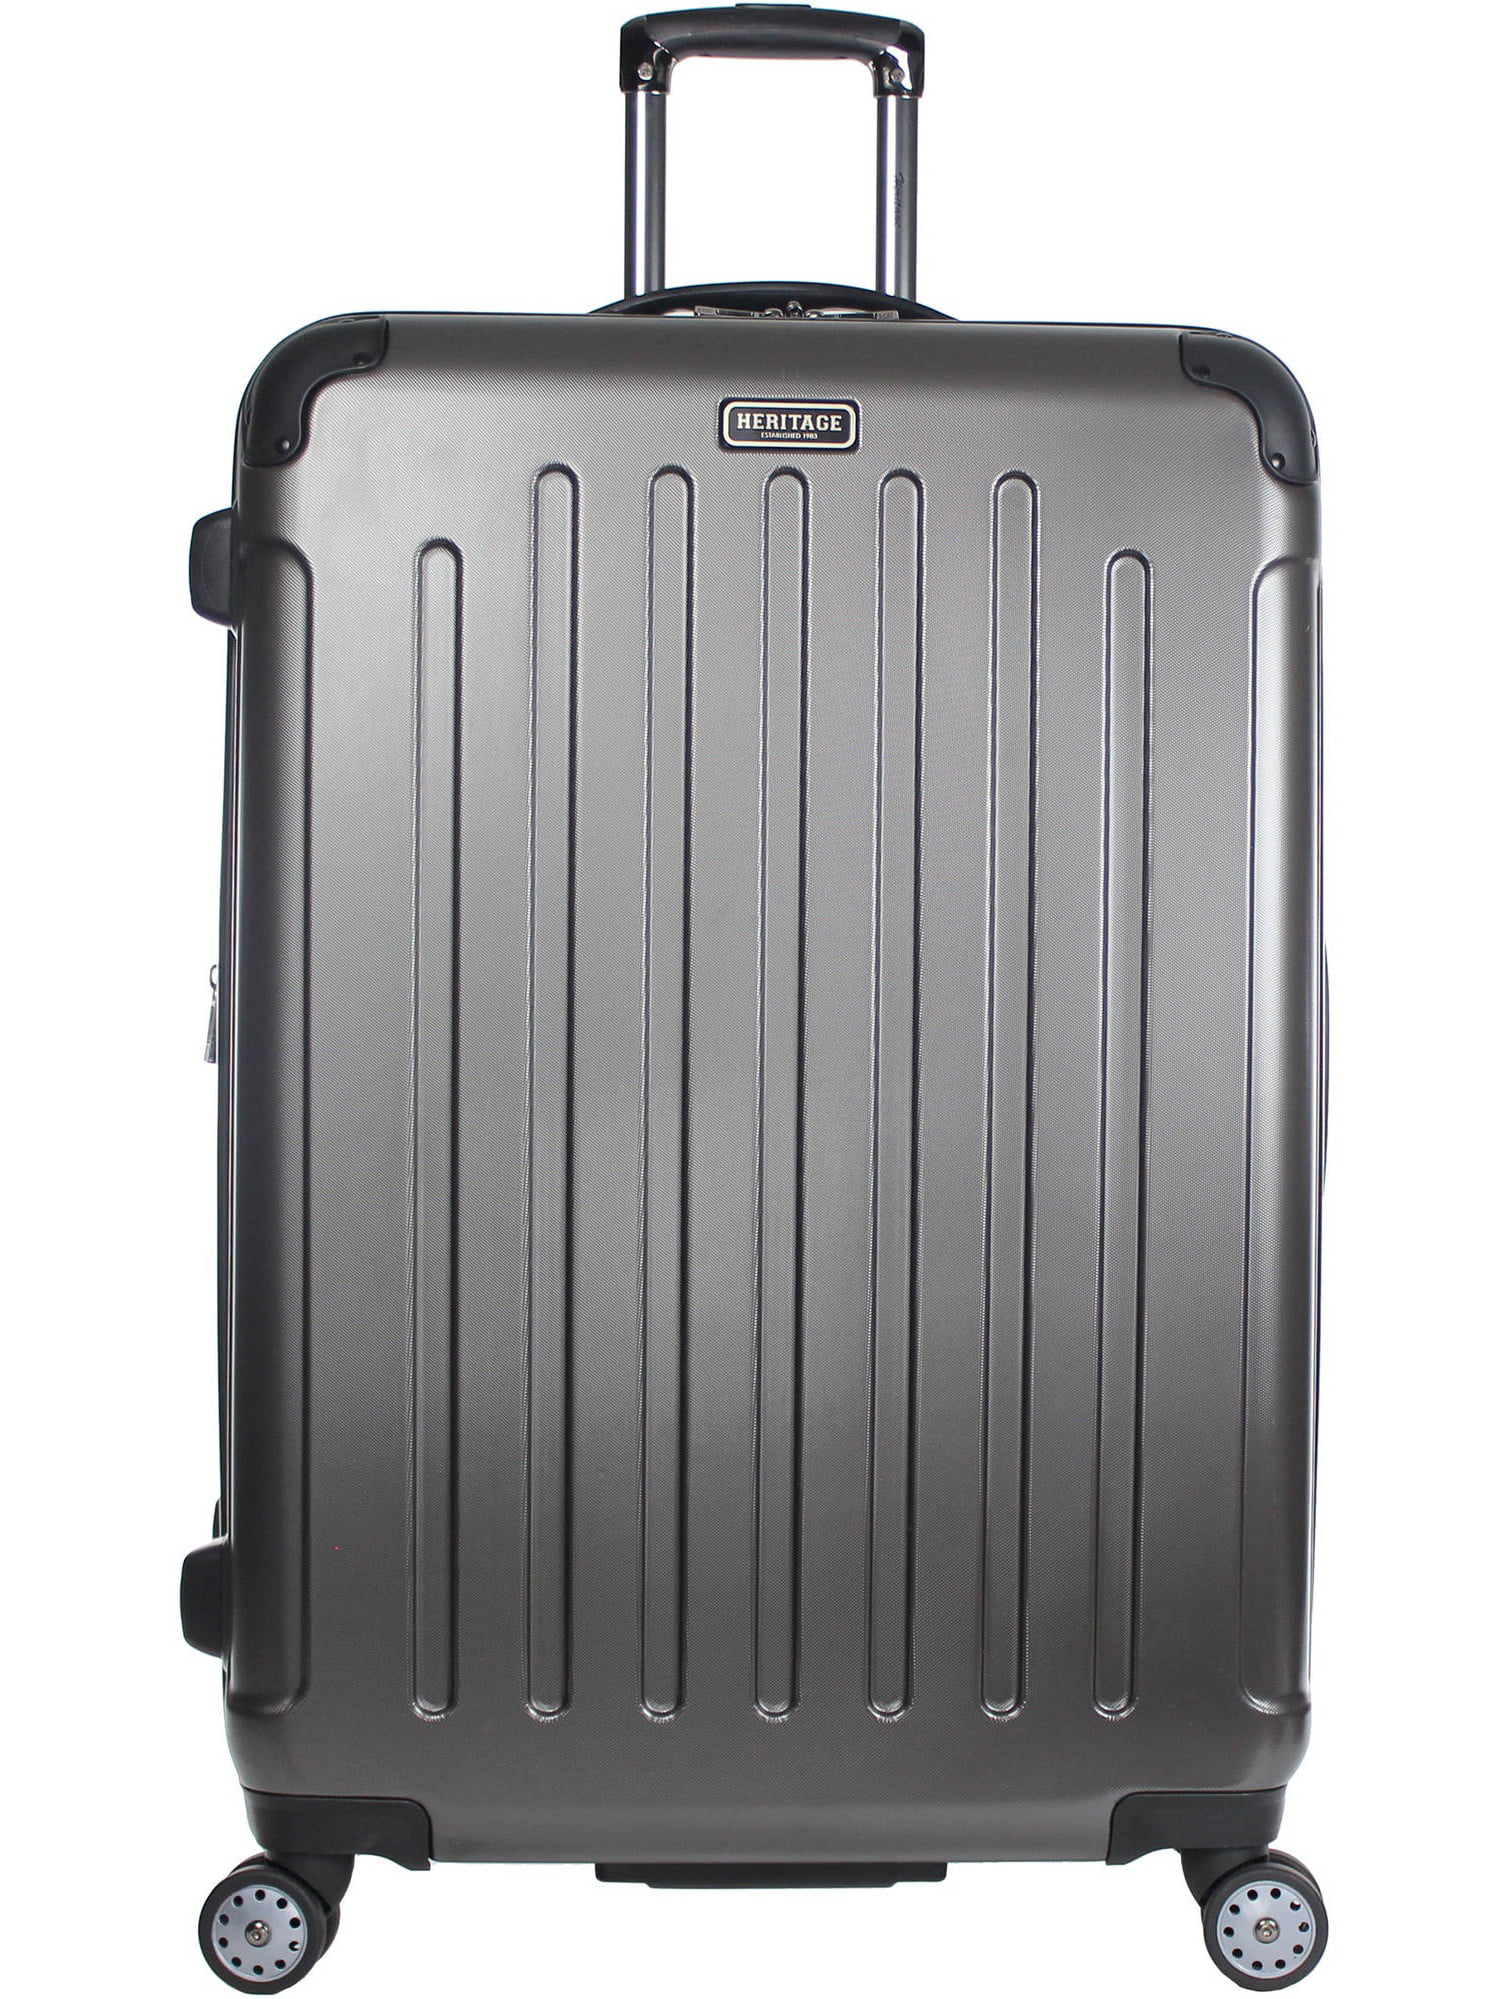 Heritage Logan Square Collection 20 Inch Expandable 8-Wheel Carry-On Luggage Light